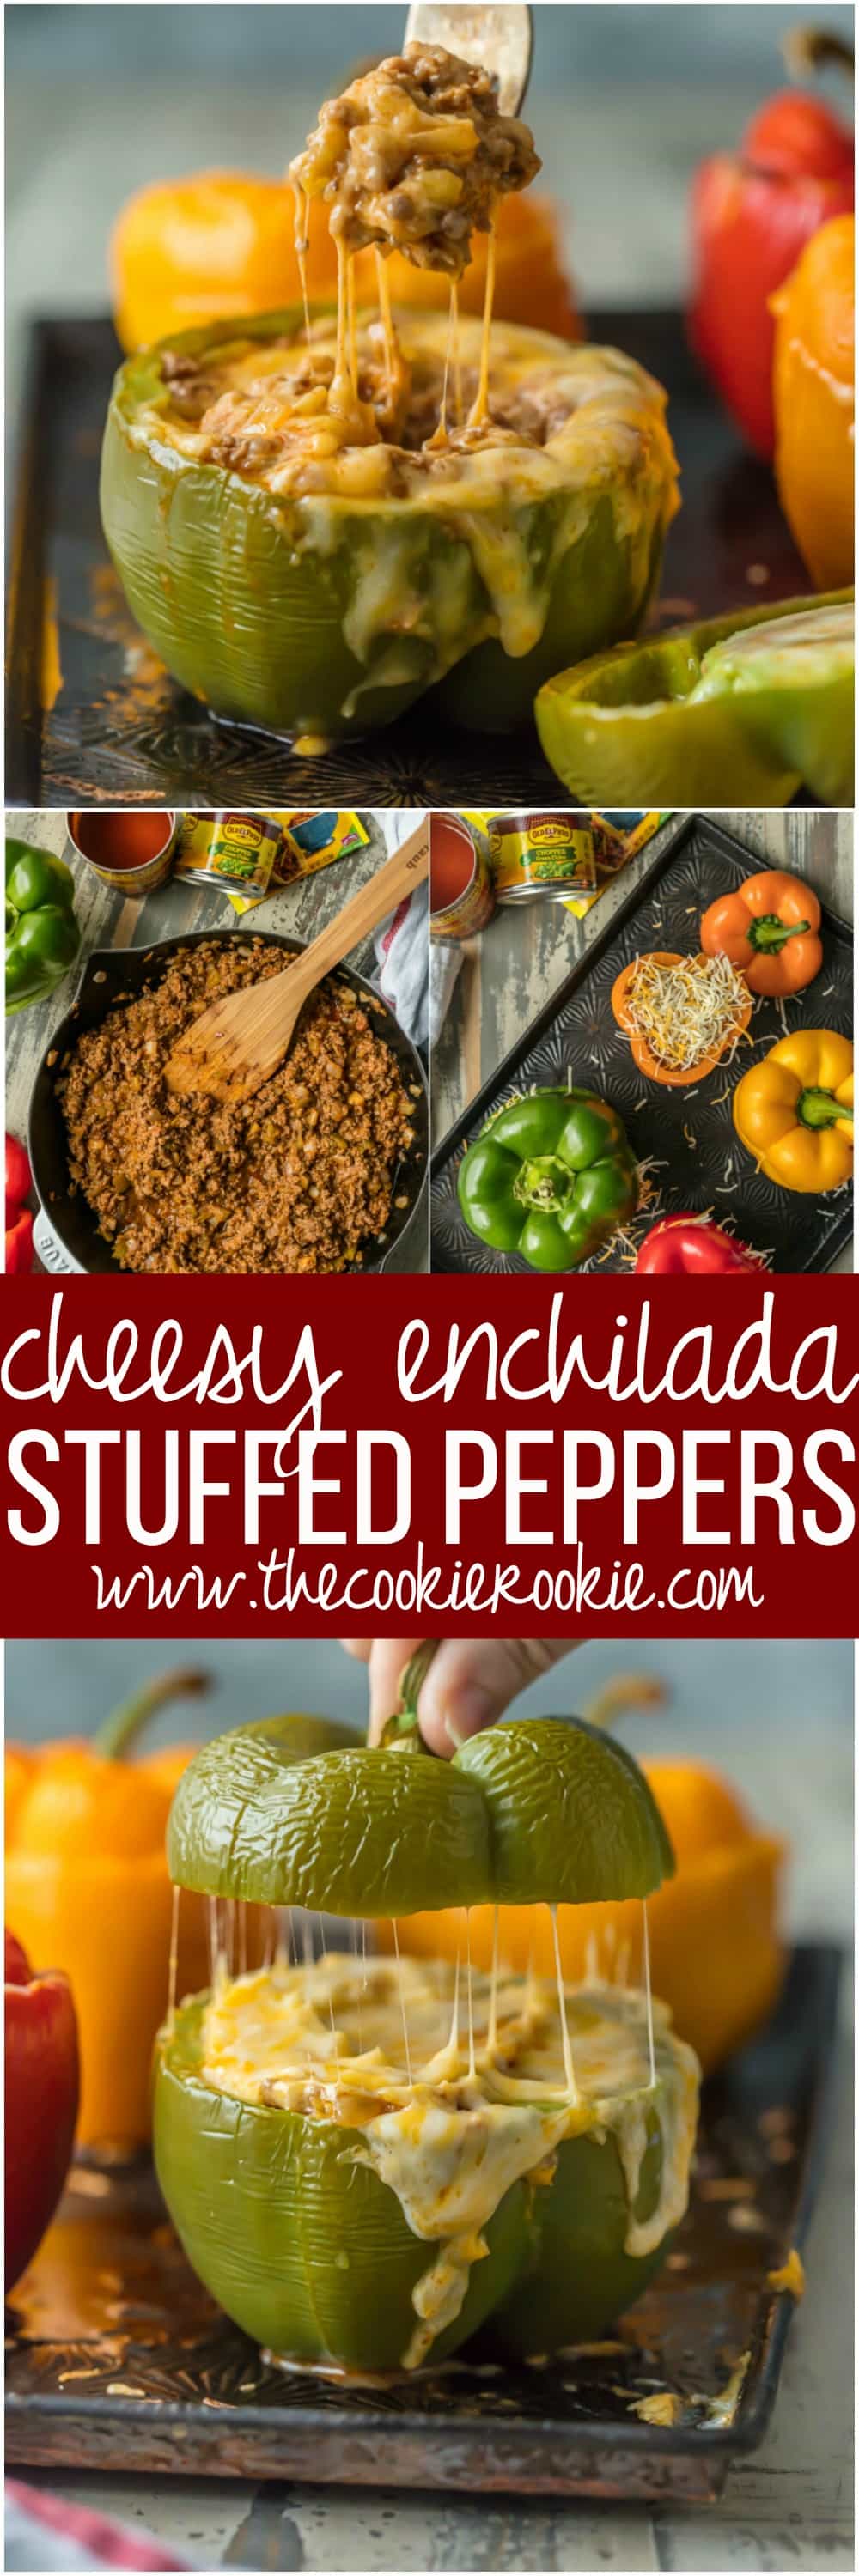 CHEESY ENCHILADA STUFFED PEPPERS are our go-to easy dinner recipe. These bell peppers are stuffed with beef, green chiles, onions, enchilada sauce, and so much cheese!